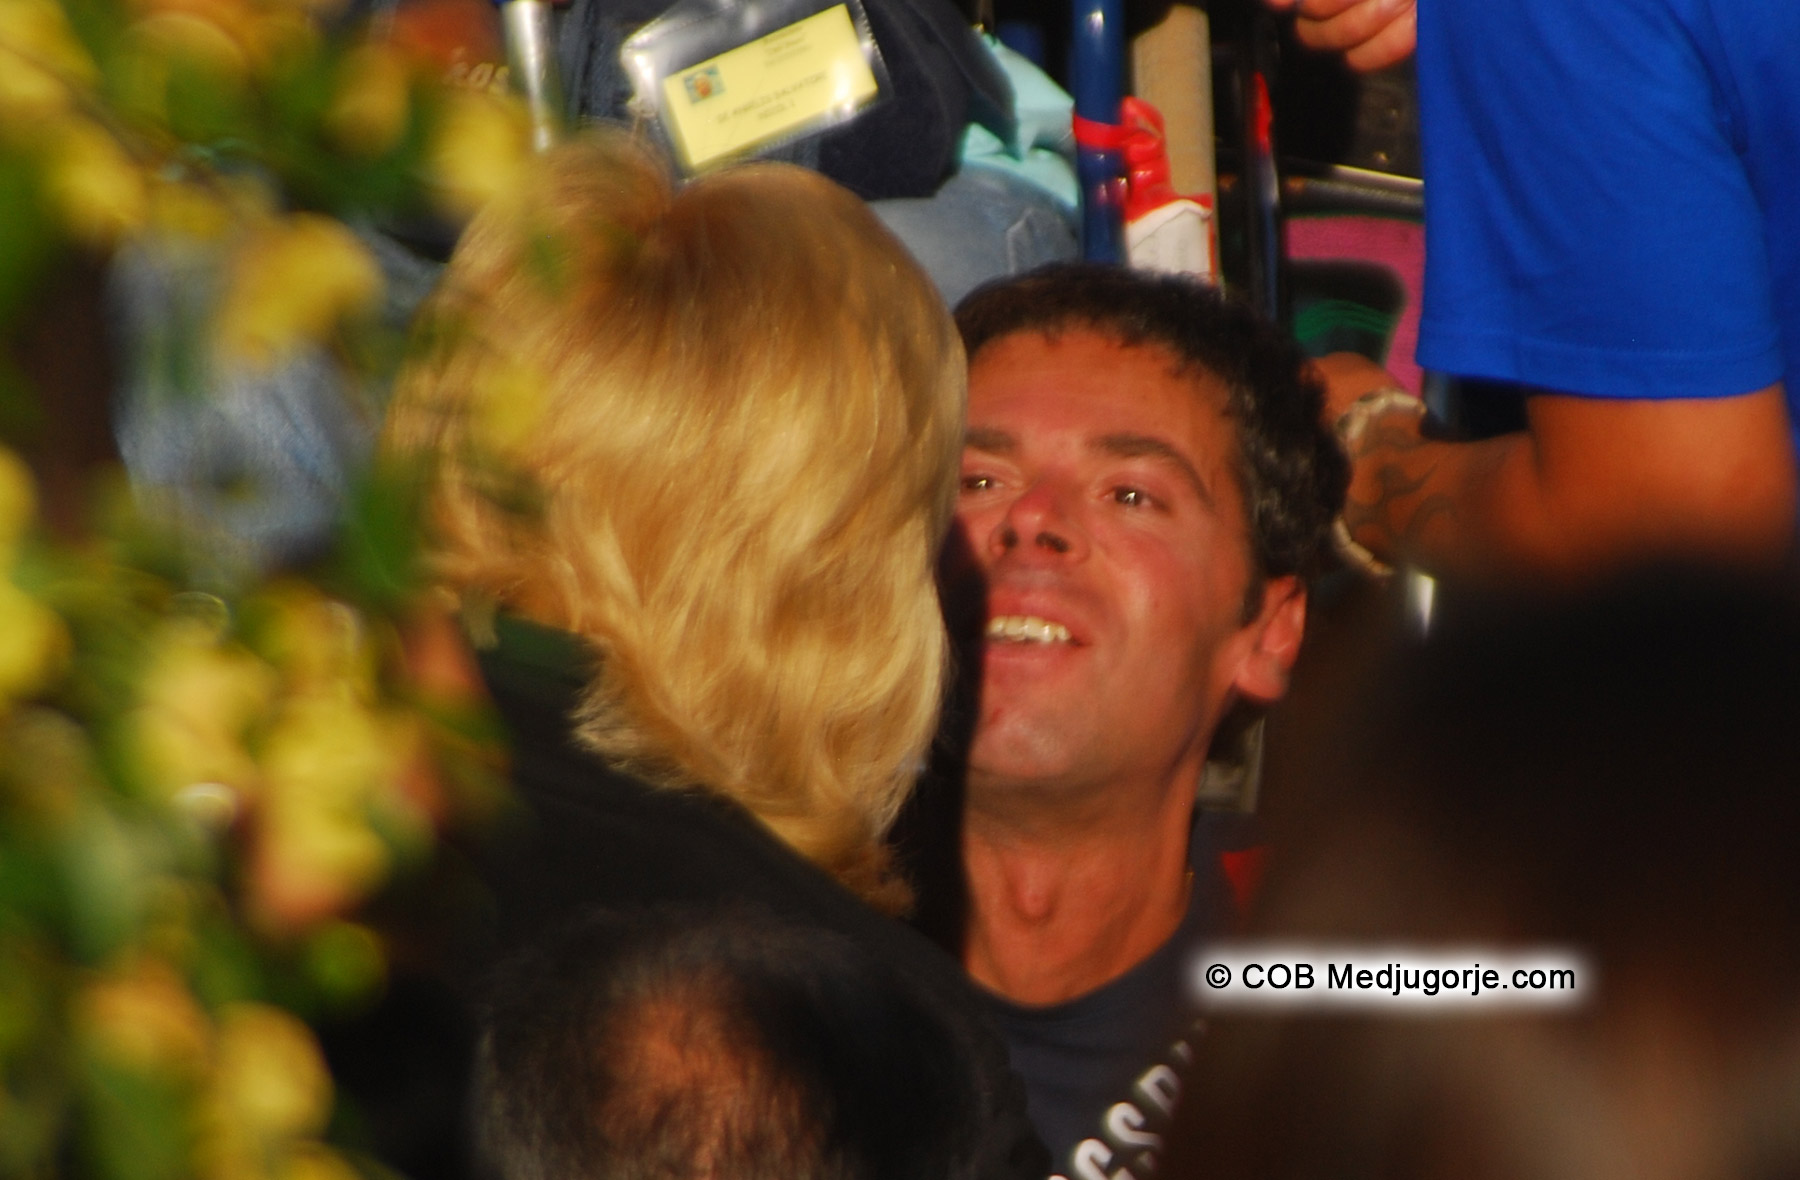 Medjugorje visionary Mijana greets a crippled man before Her Apparition